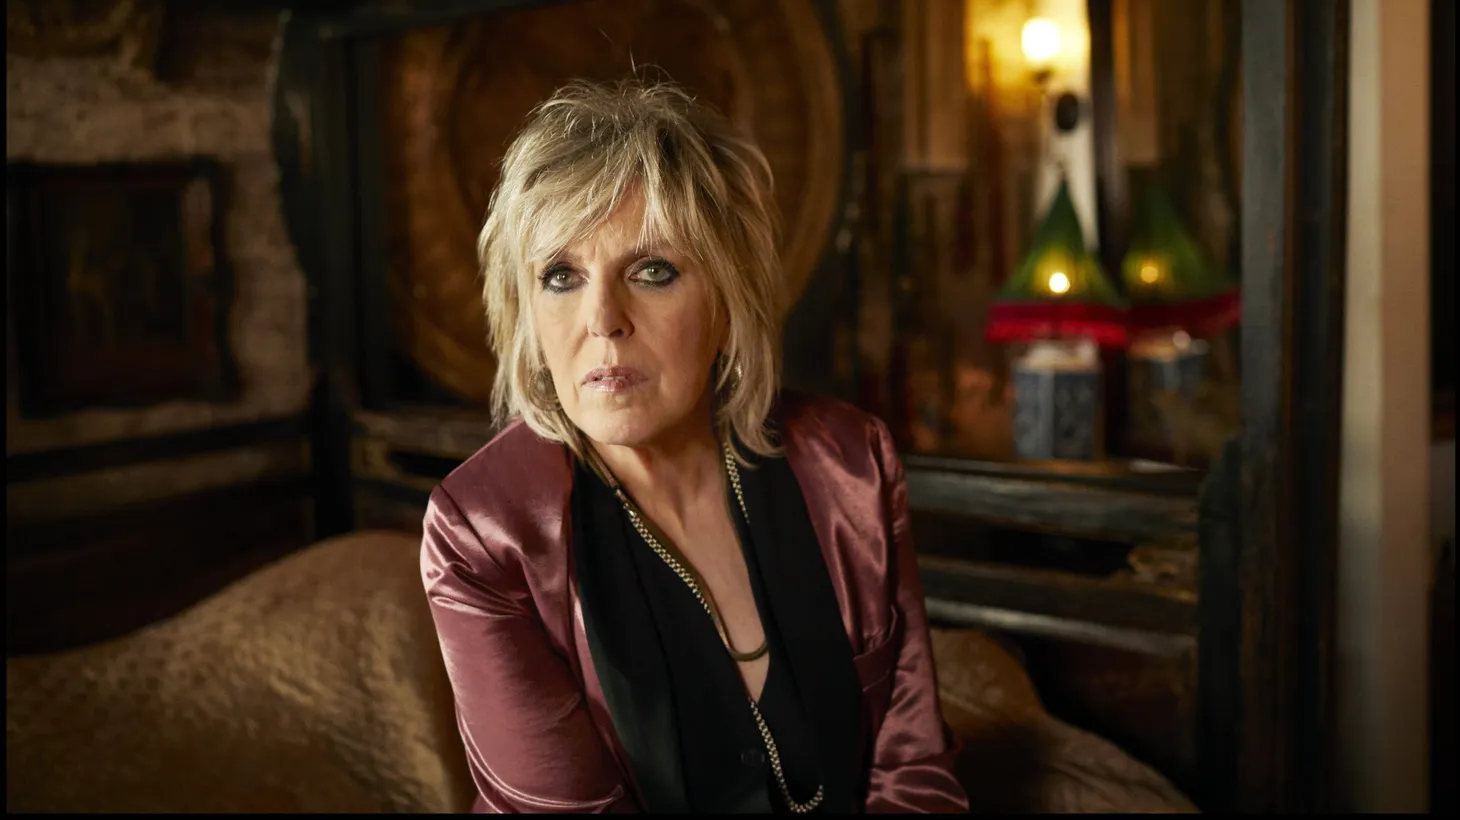 Lucinda Williams points to her dad as her greatest teacher: “I looked up to him — not just as my father but as a writer. And I learned a lot that way, almost by osmosis. In a sense, it was like an apprenticeship.”